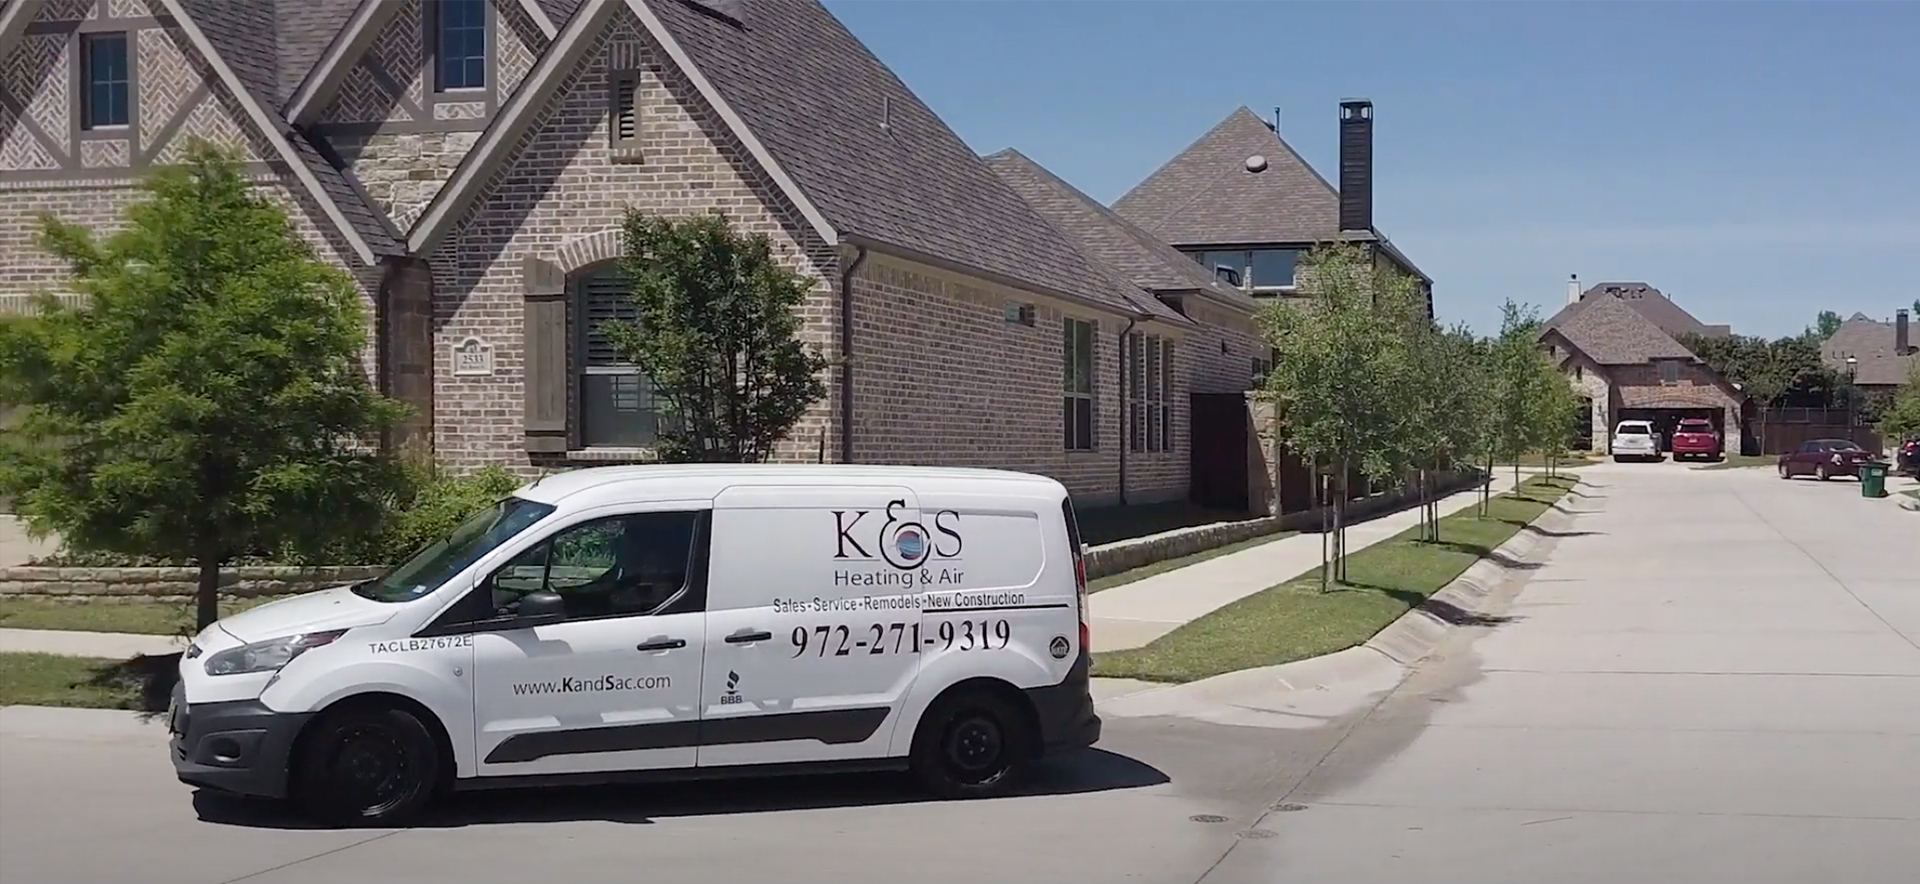 Heating and Air Conditioning Service Dallas, TX